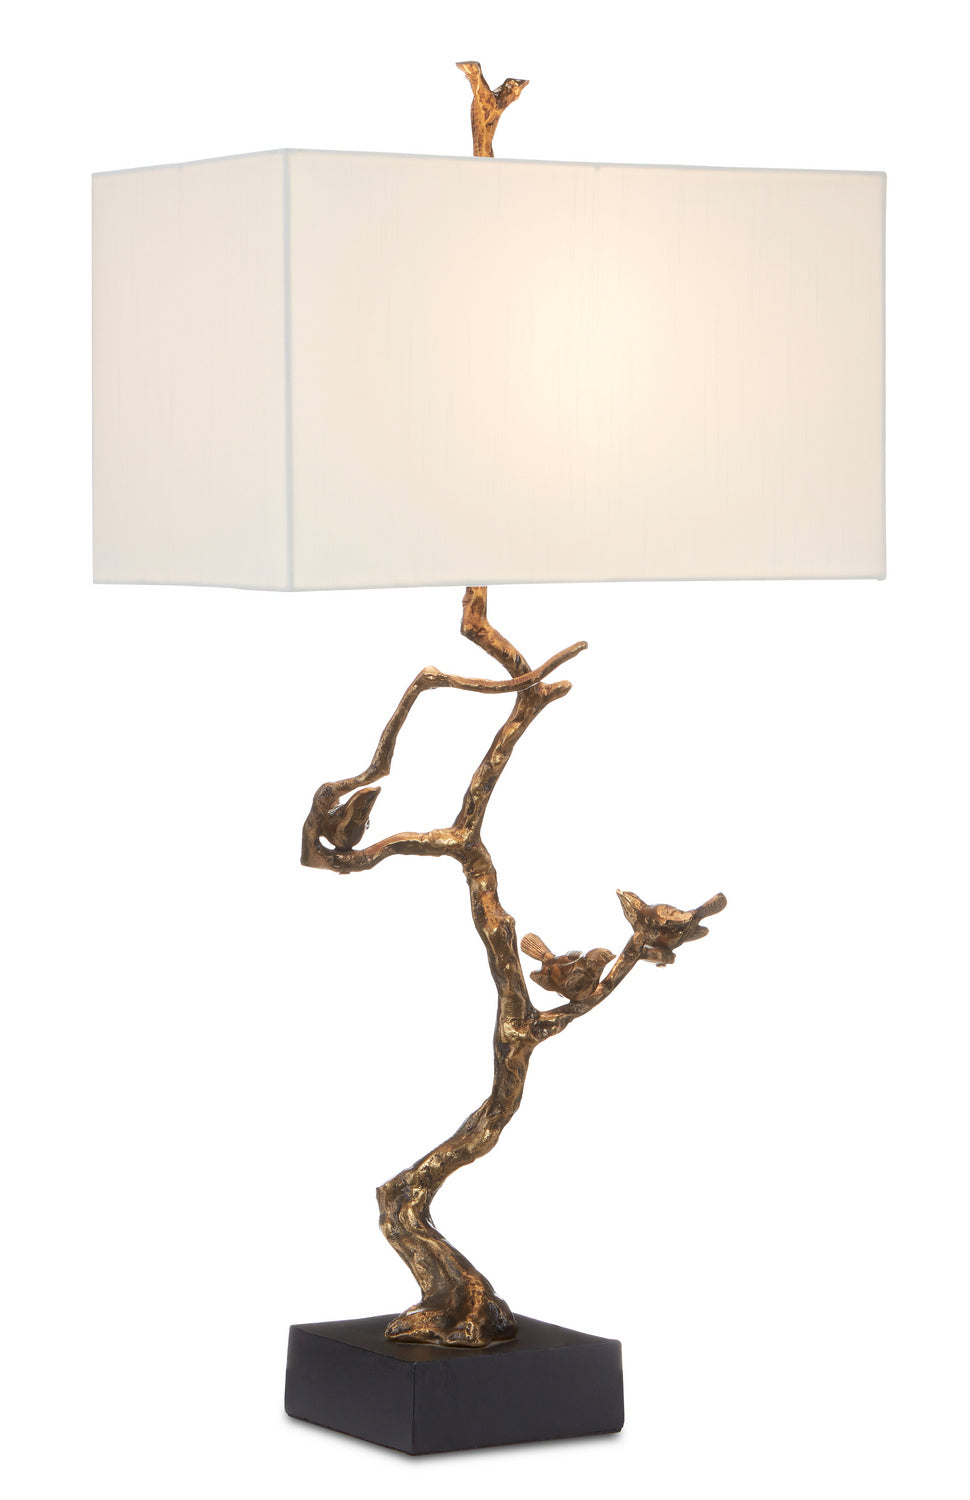 One Light Table Lamp from the Shadows collection in Antique Brass/Black finish